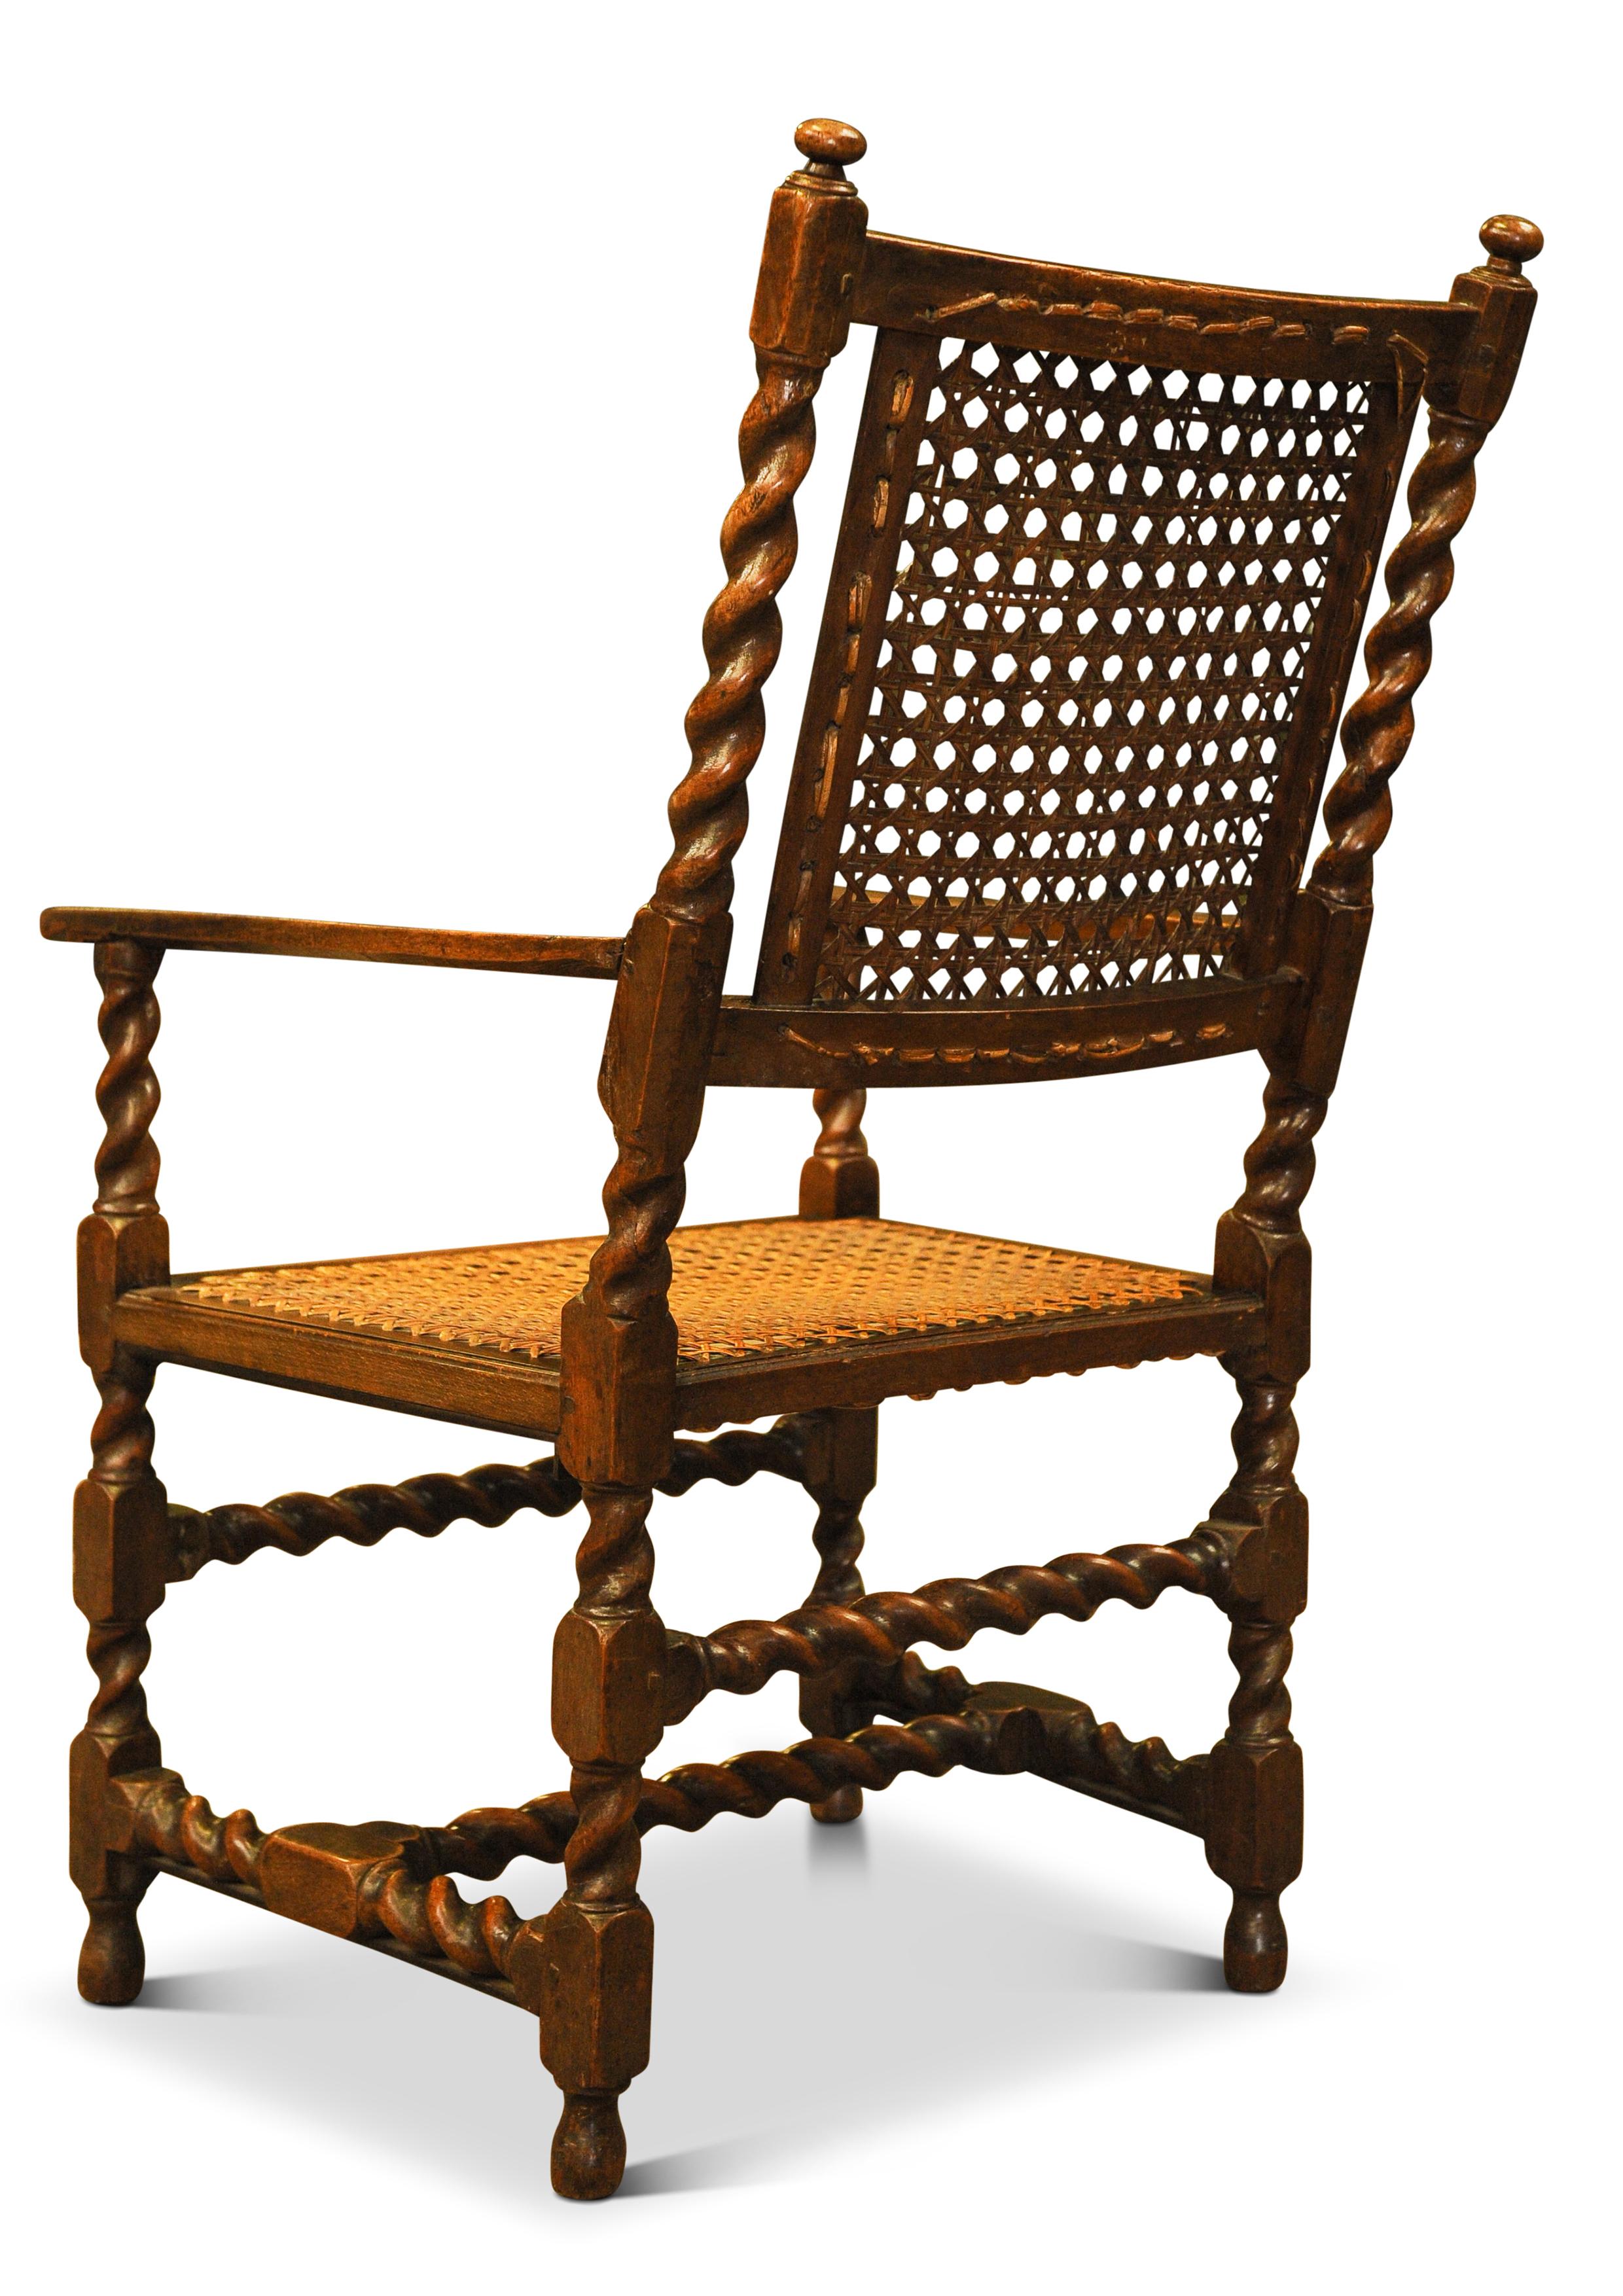 19th Century Antique Walnut Barley Twist Library Armchair with Cane Seat & Rear 1850s For Sale